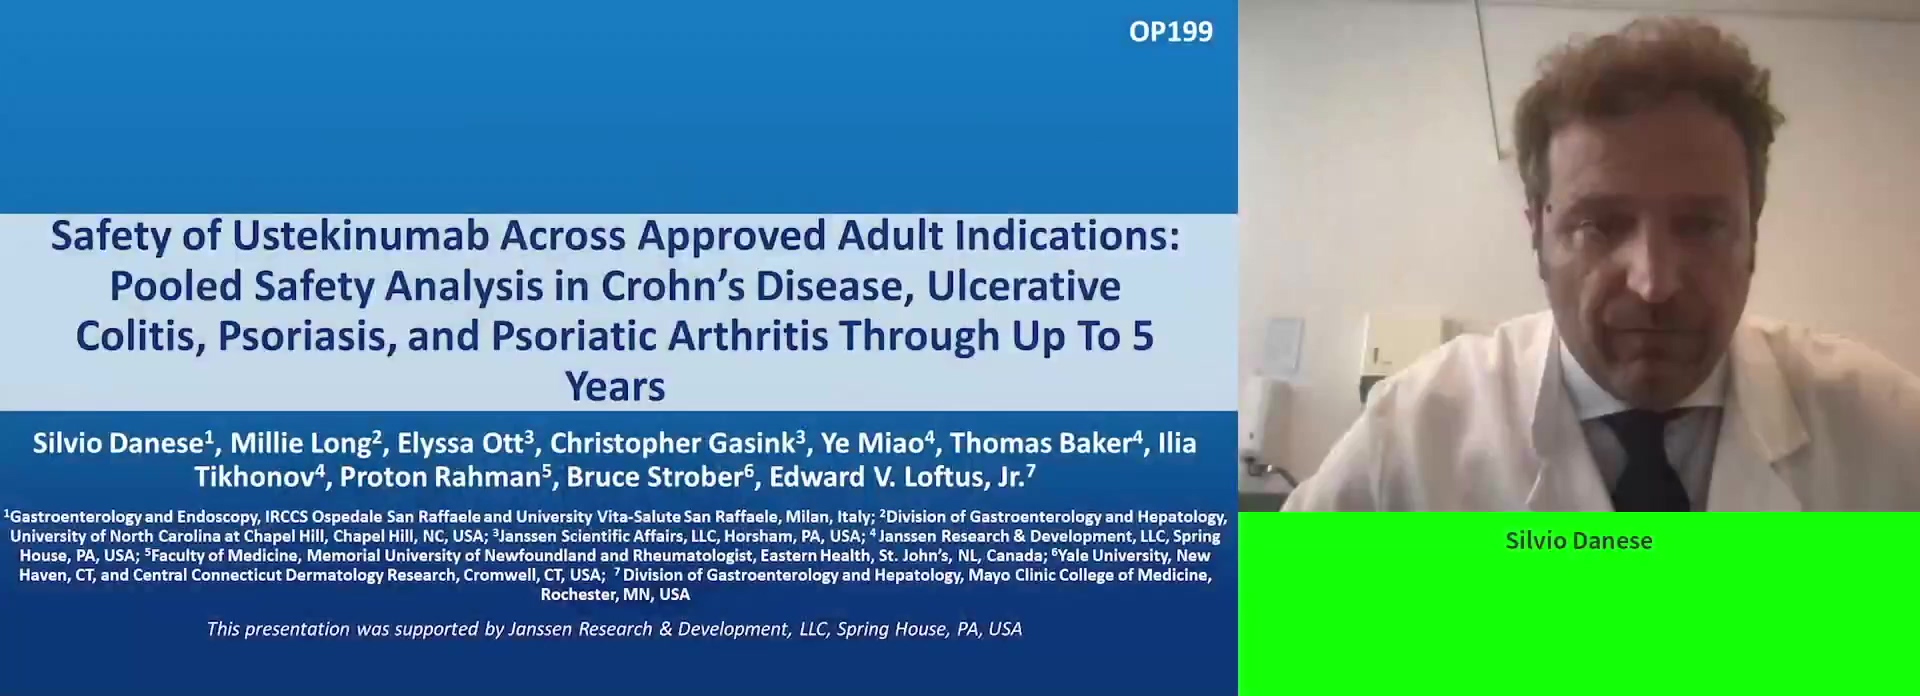 SAFETY OF USTEKINUMAB ACROSS APPROVED ADULT INDICATIONS: POOLED SAFETY ANALYSIS IN CROHN’S DISEASE, ULCERATIVE COLITIS, PSORIASIS, AND PSORIATIC ARTHRITIS THROUGH UP TO 5 YEARS